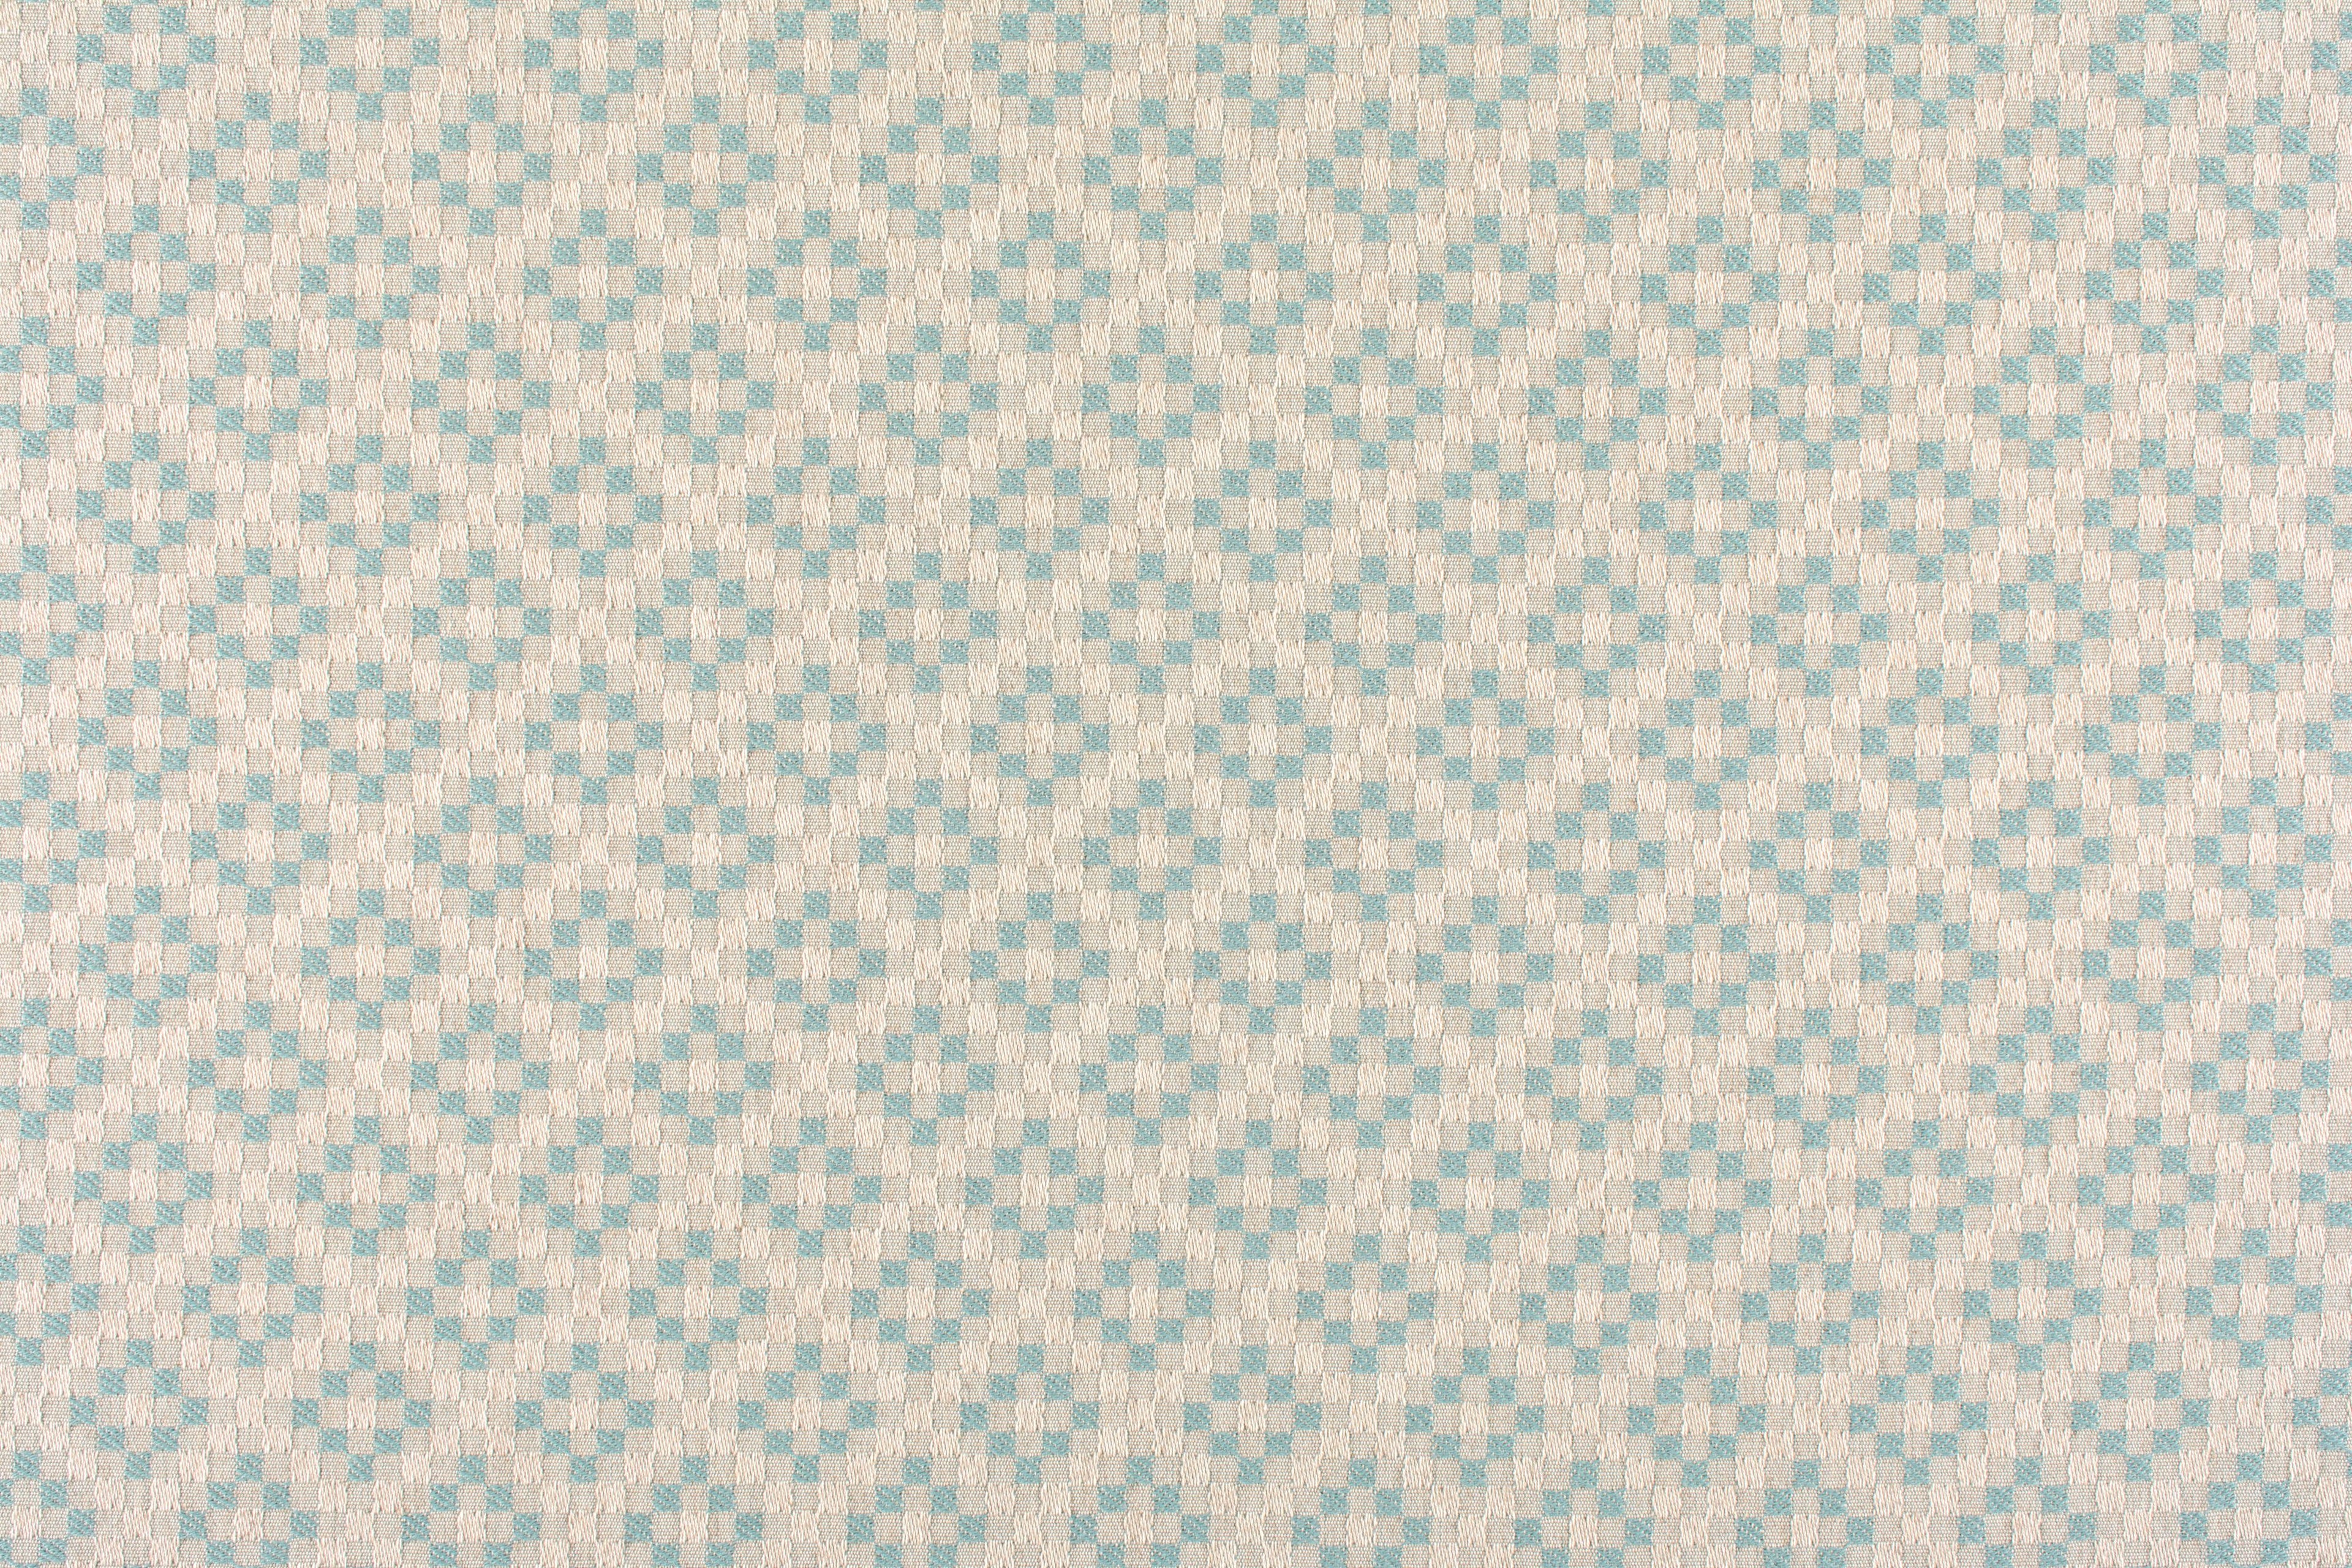 Lorcan fabric in mint color - pattern number VW 0004FC01 - by Scalamandre in the Old World Weavers collection